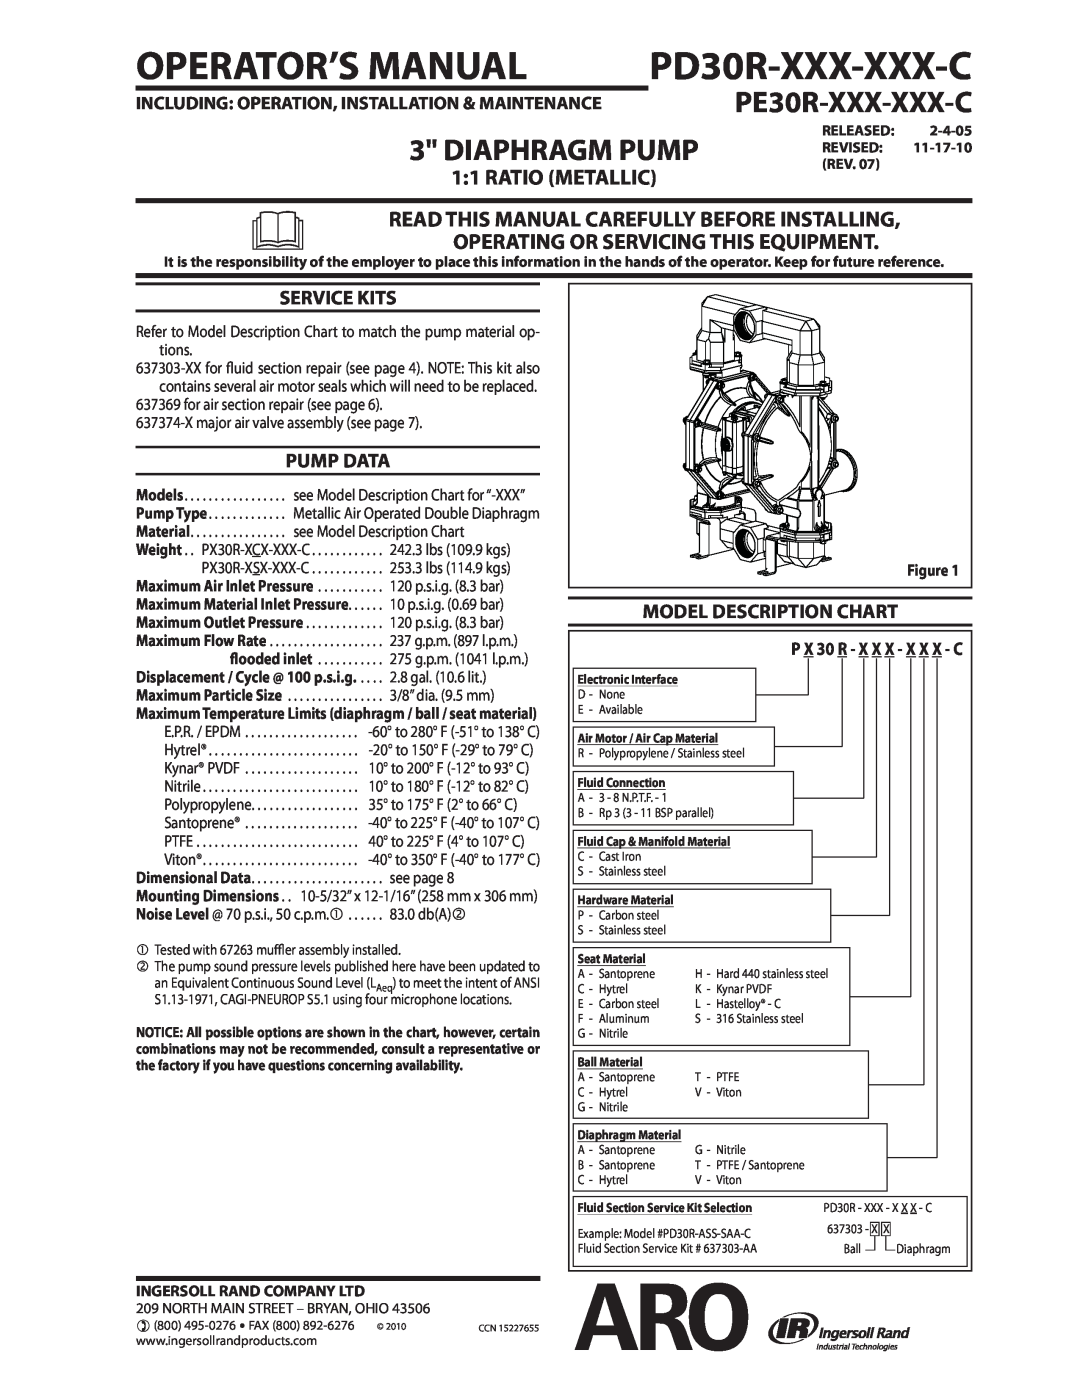 Ingersoll-Rand PD30R-XXX-XXX-C dimensions 1 1 RATIO METALLIC, Read This Manual Carefully Before Installing, Service Kits 